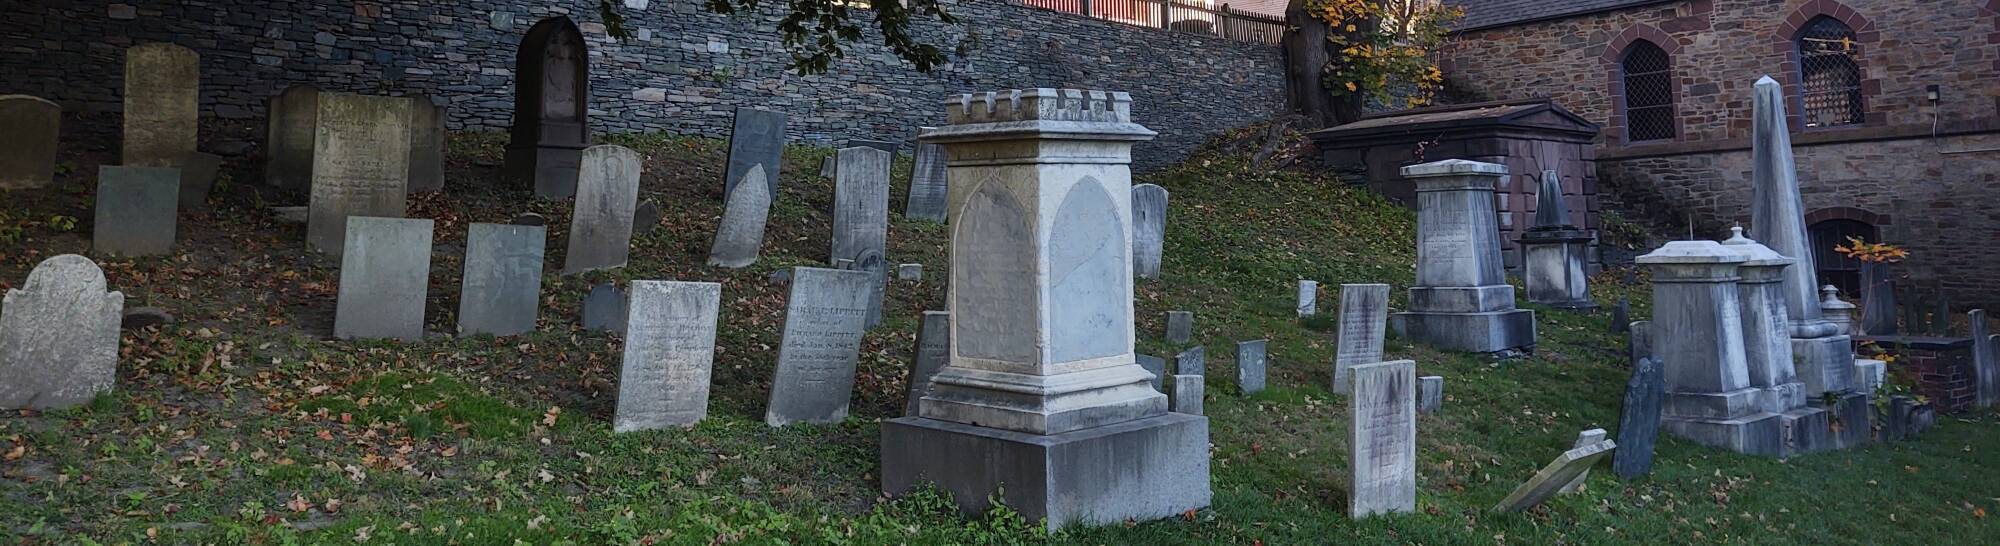 Saint John's cemetery in Providence, a favorite site of Edgar Allan Poe and also H. P. Lovecraft